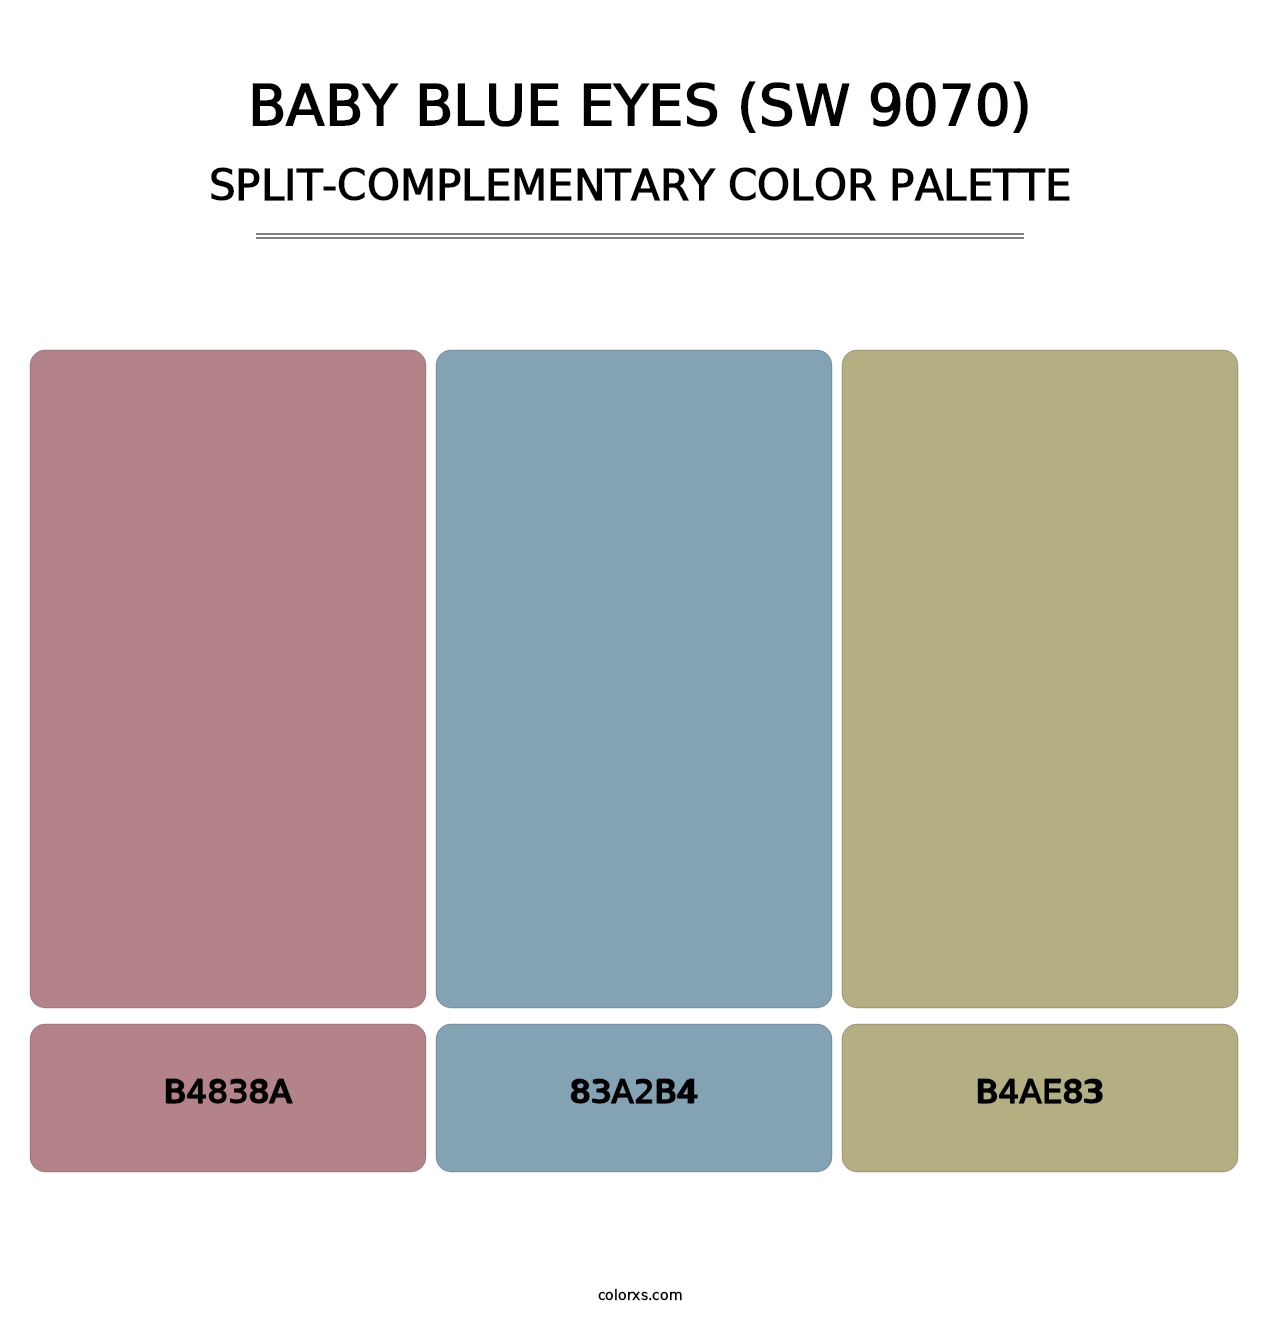 Baby Blue Eyes (SW 9070) - Split-Complementary Color Palette